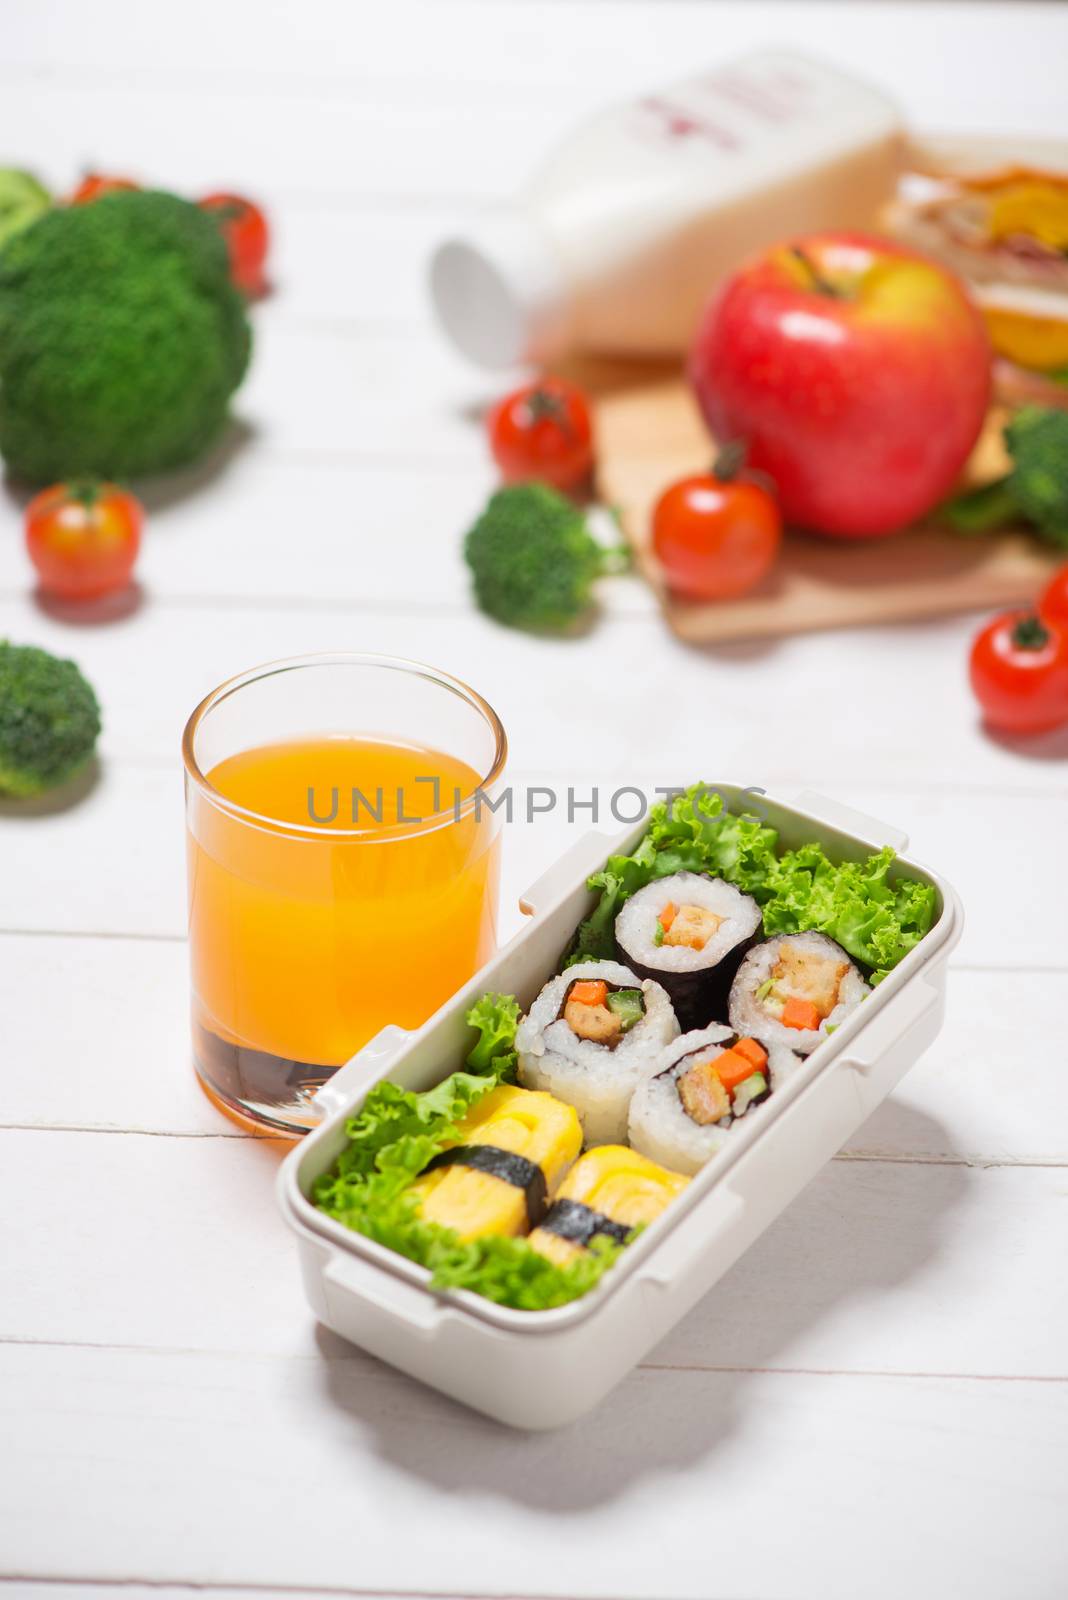 Orange juice and bento box with different food, fresh veggies an by makidotvn